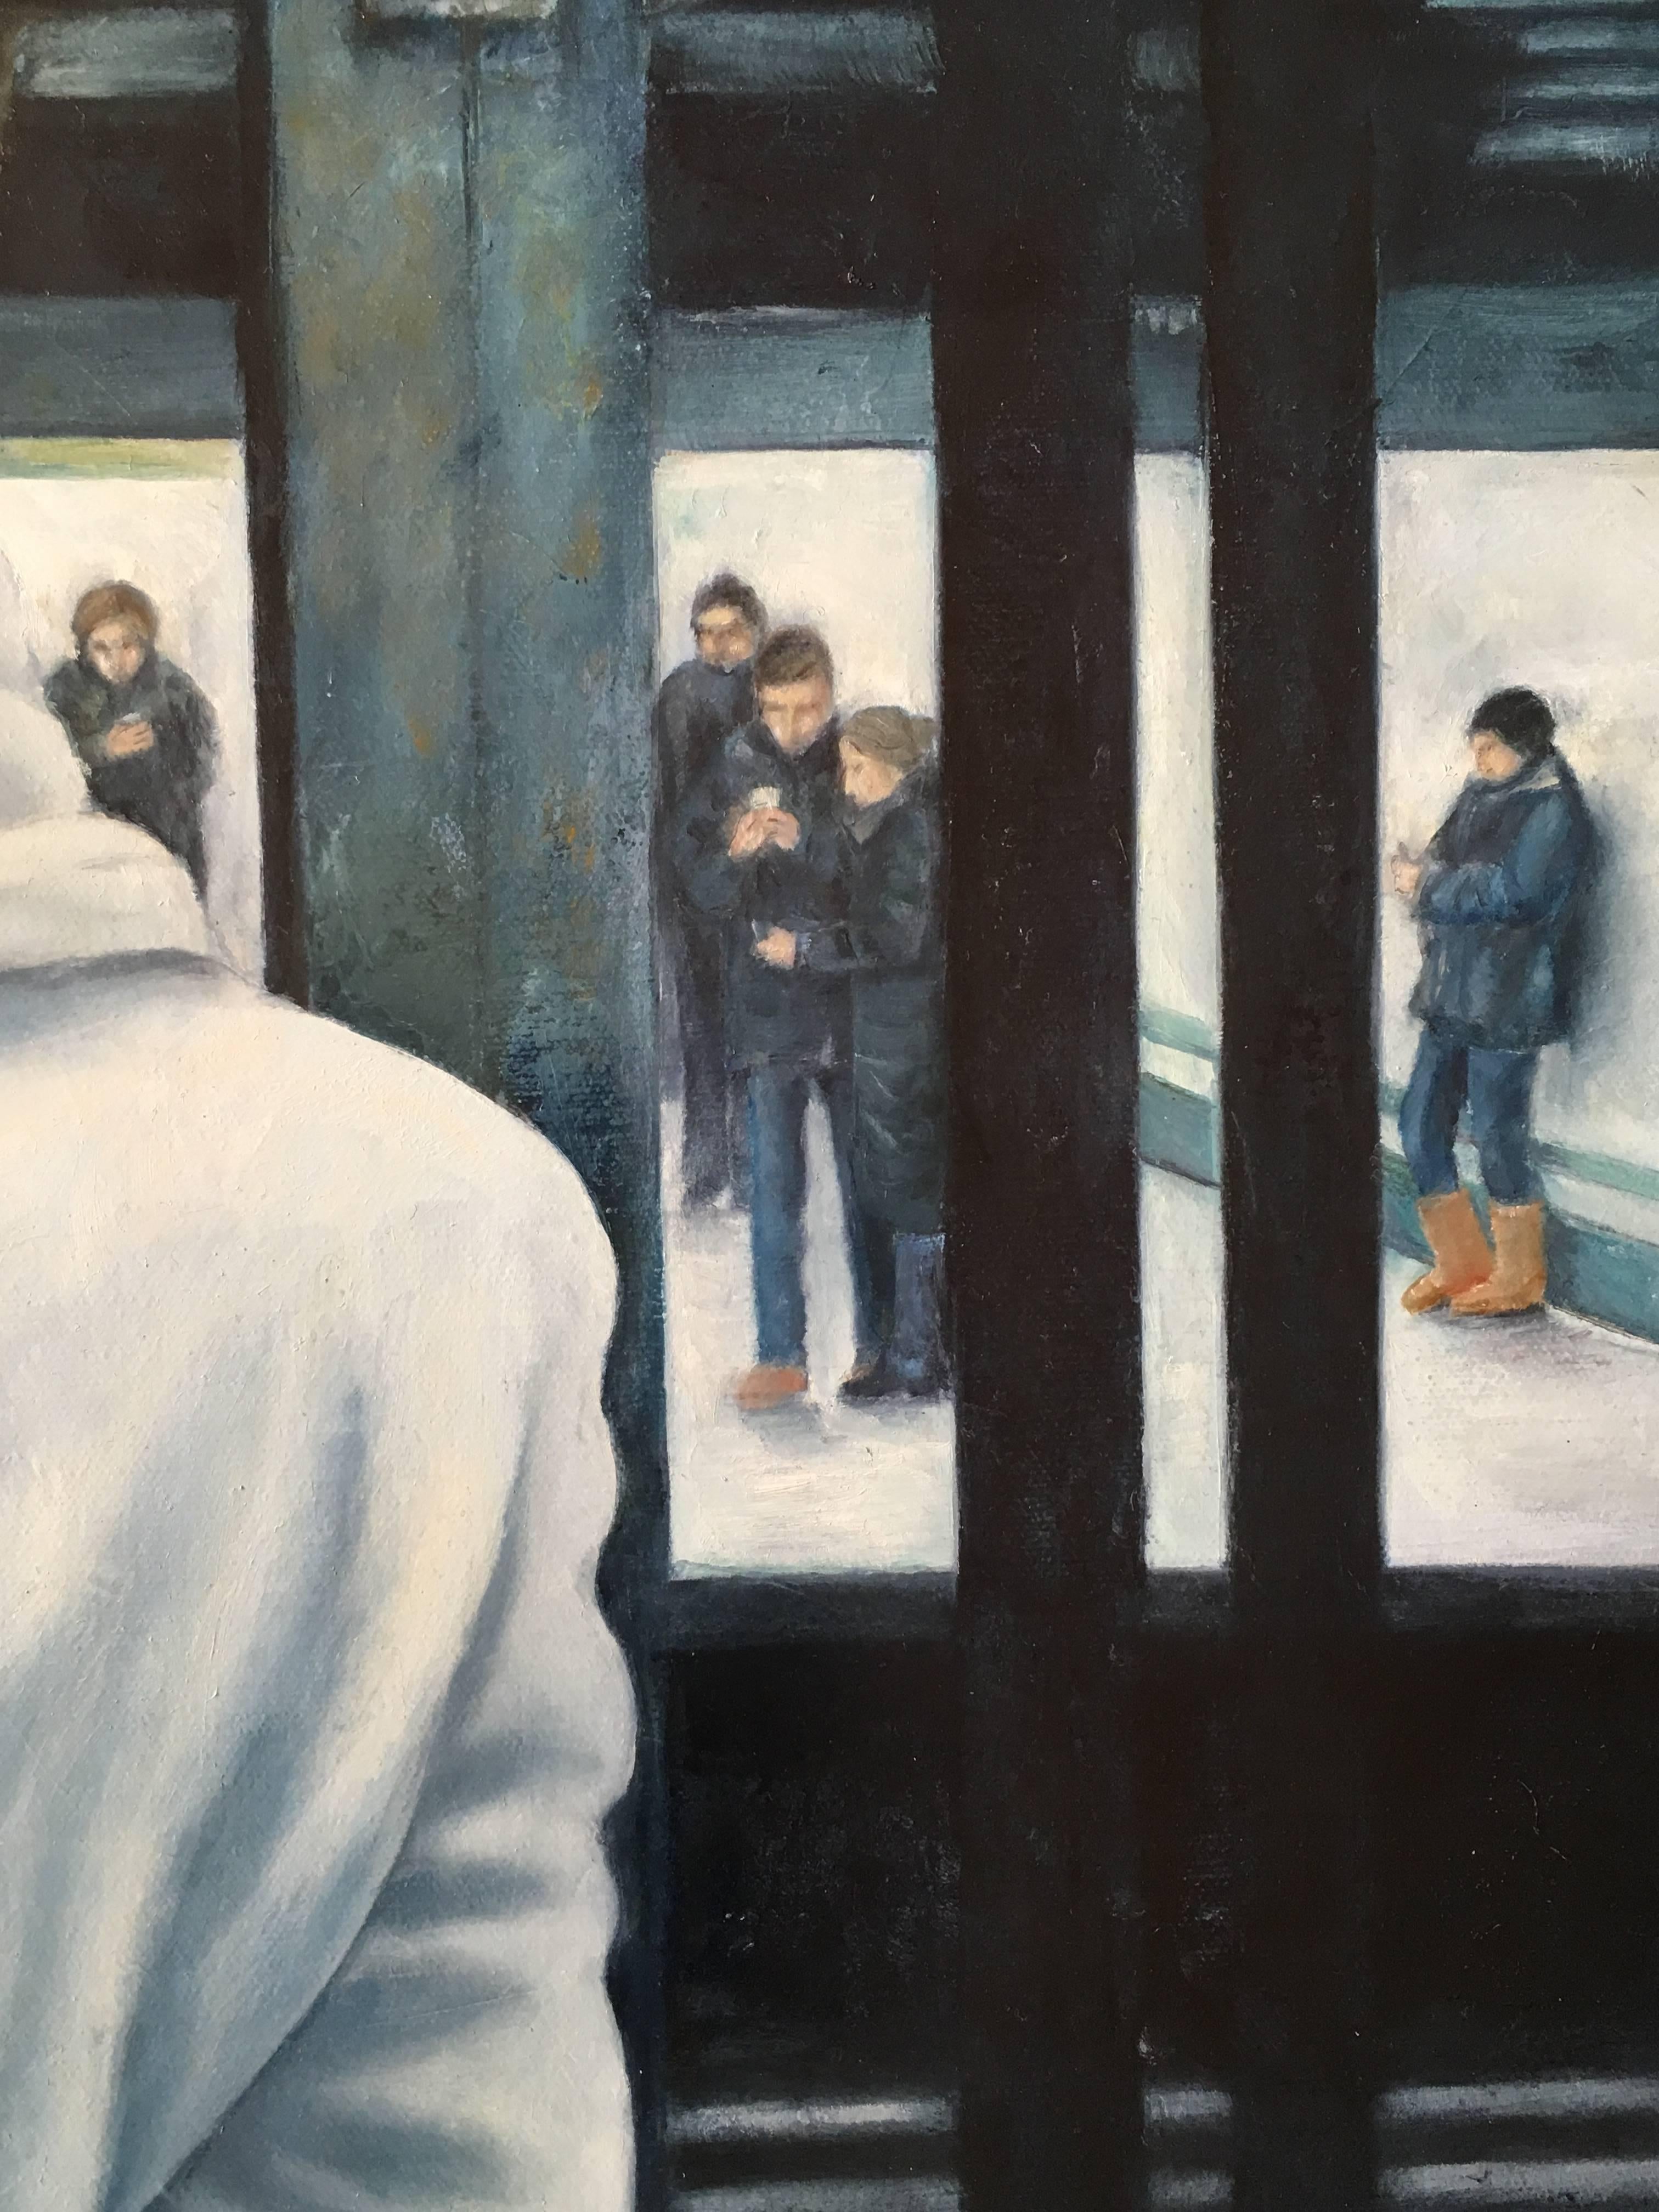 The Angel of Prince Street Station - Black Figurative Painting by Kris Galli